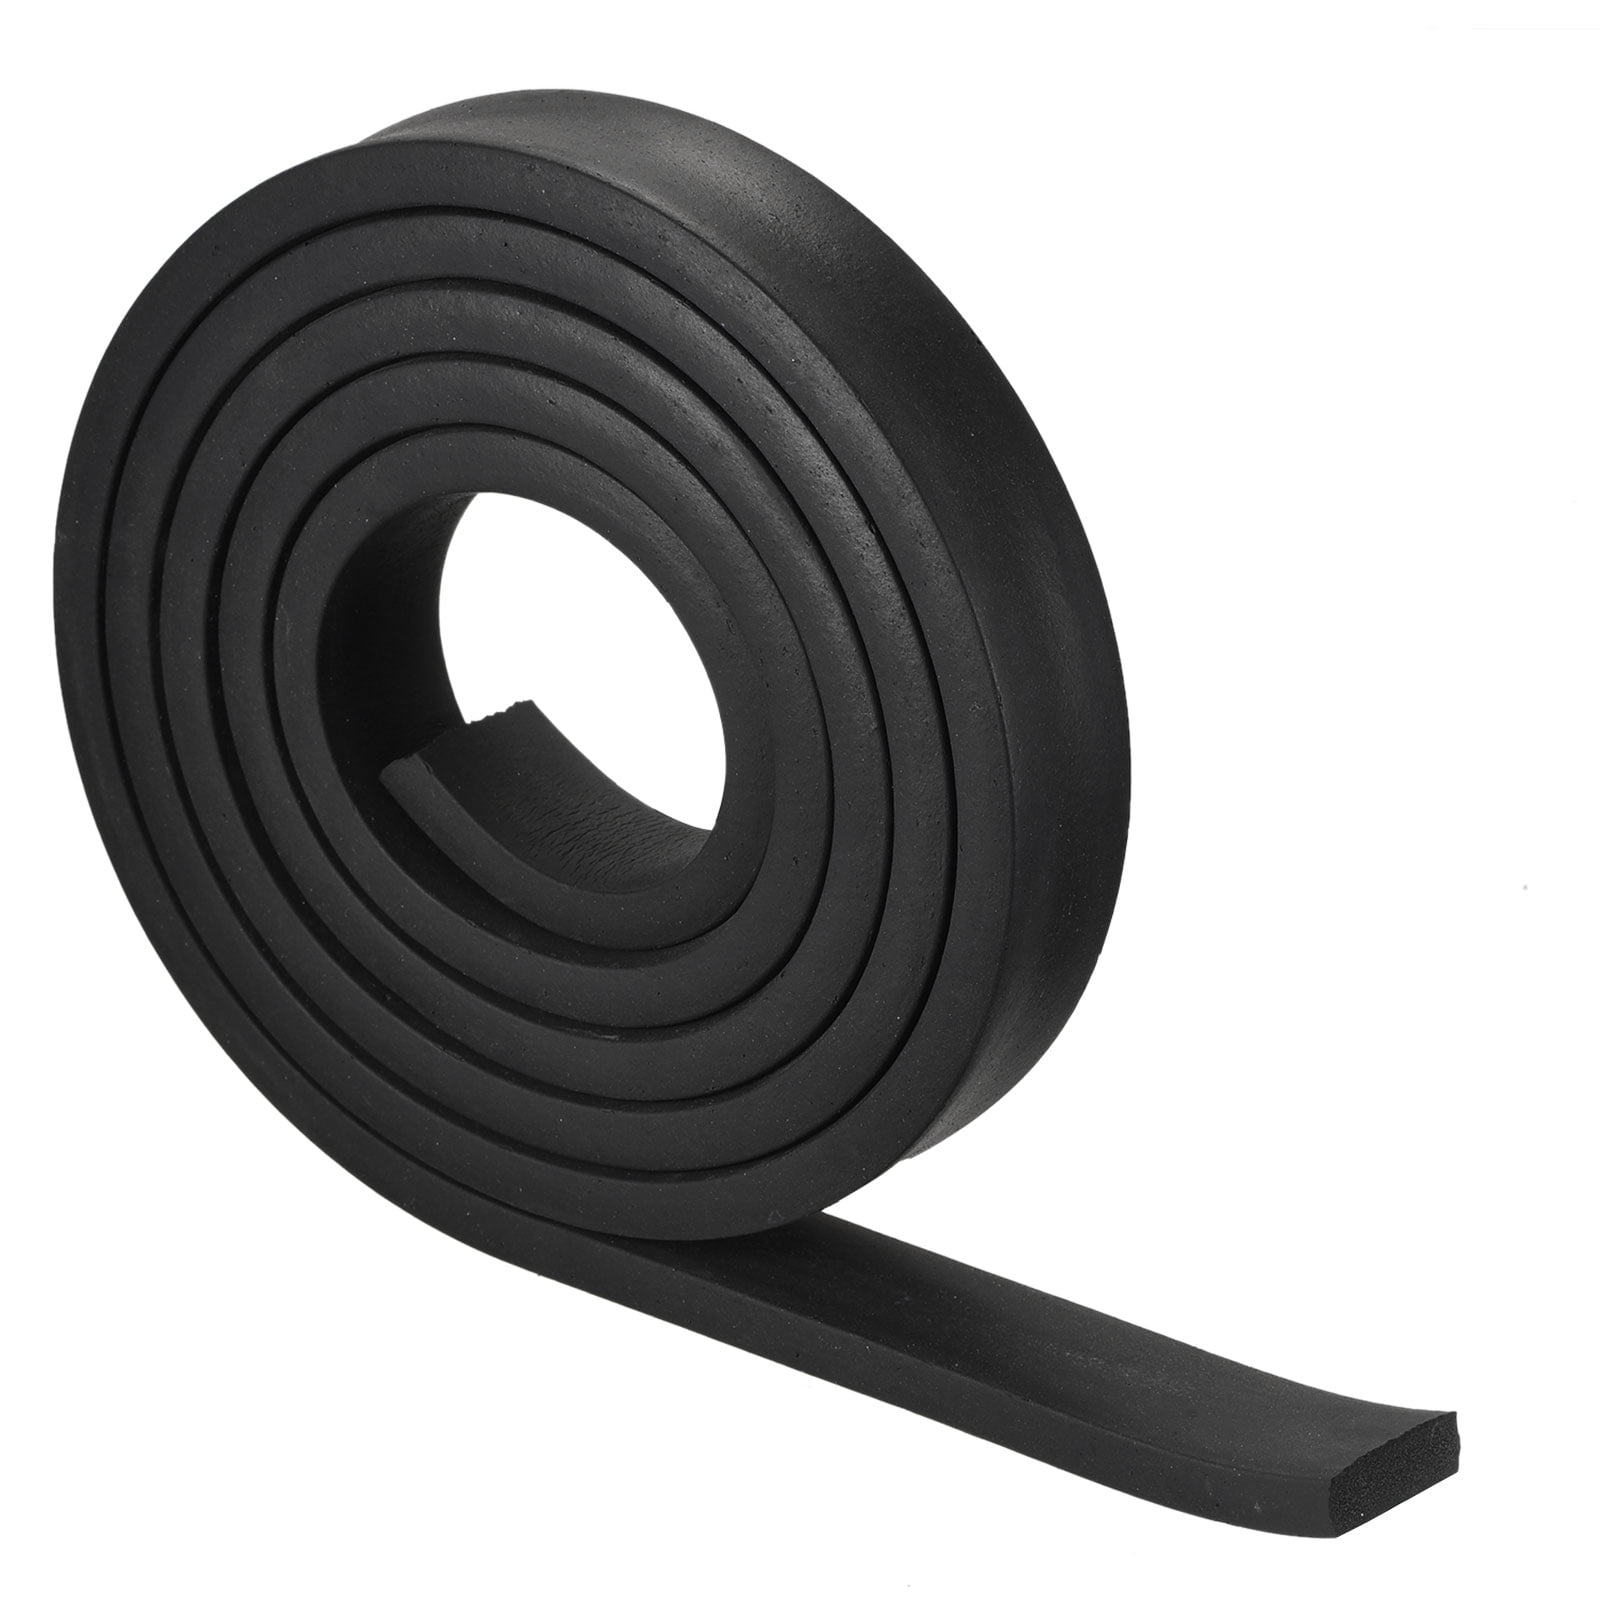 Grey Foam Pad Strip (4 inch ) At Great Prices!